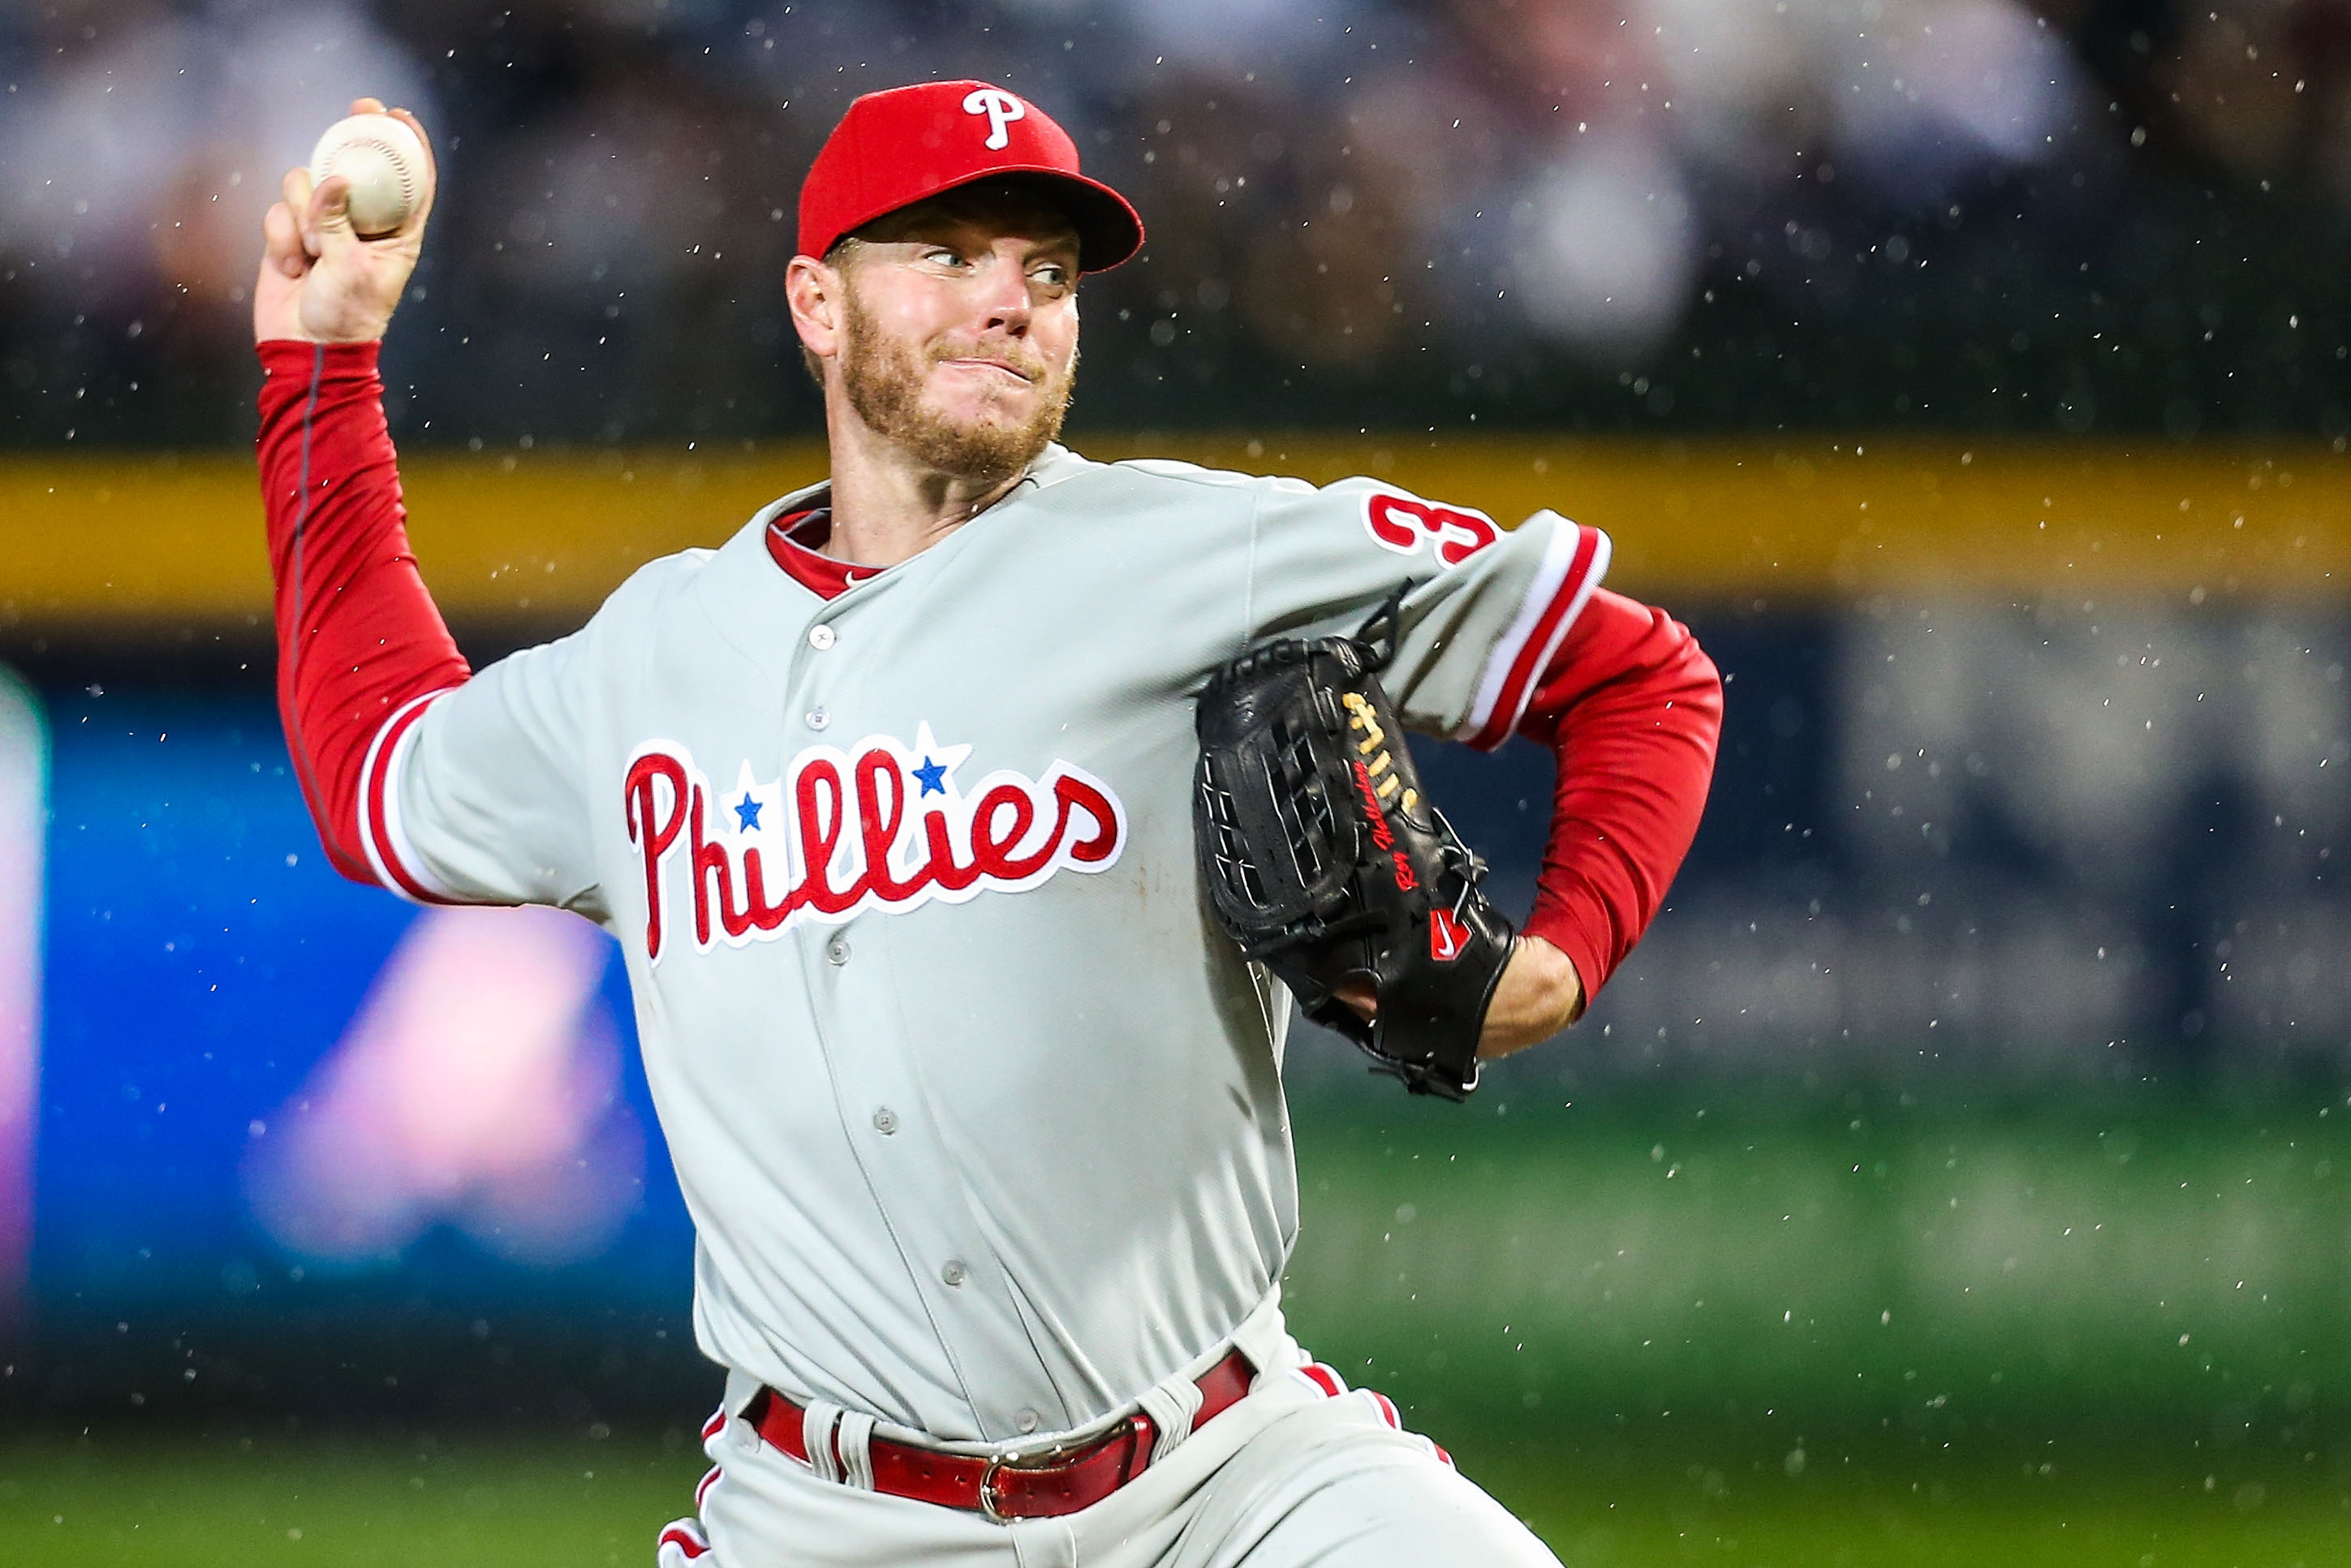 Roy Halladay's inner fire and mental toughness propelled him into Baseball  Hall of Fame